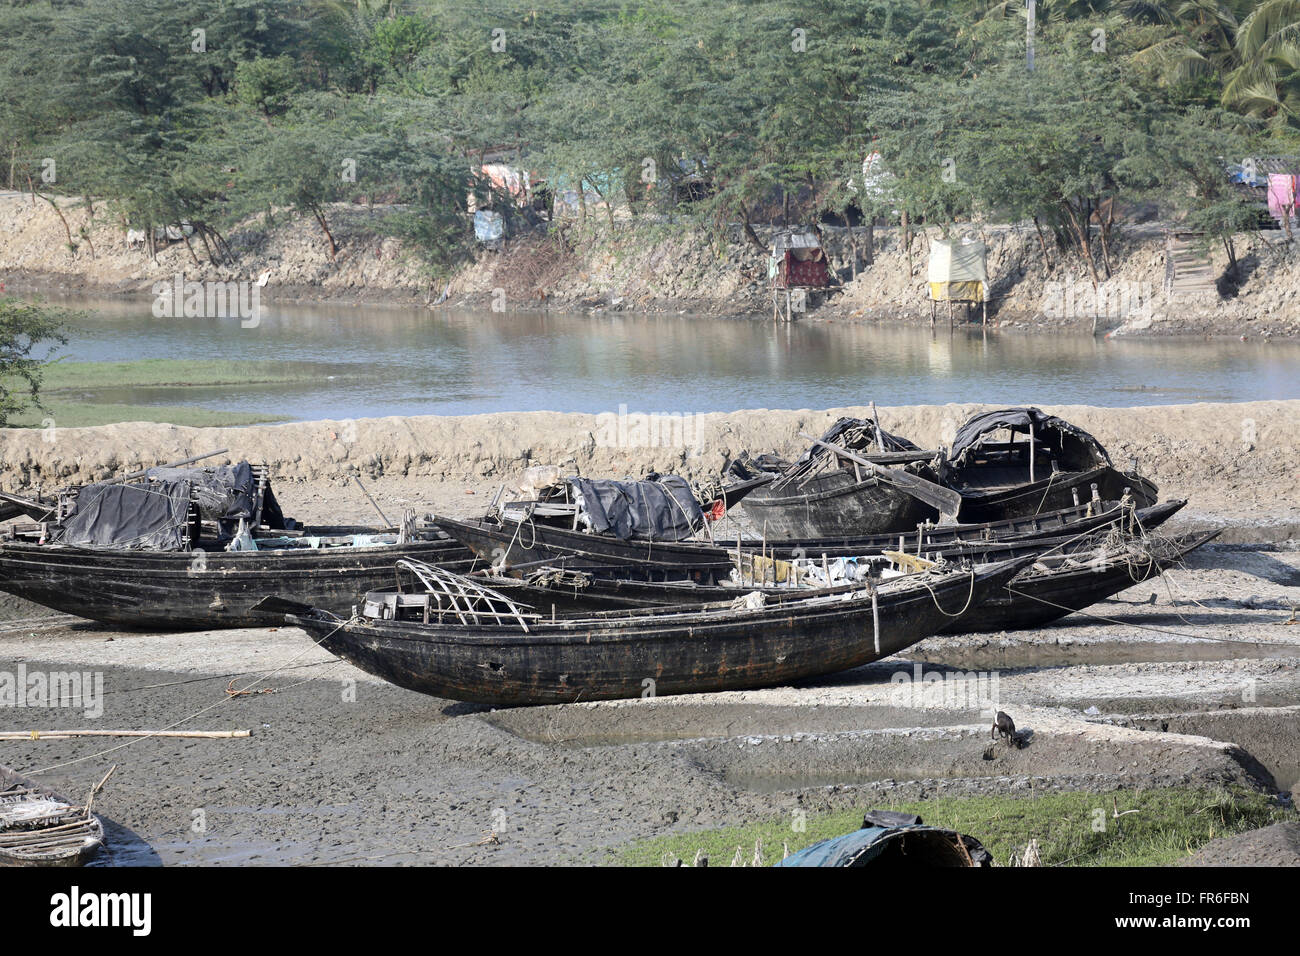 Boats of fishermen stranded in the mud at low tide on the river Matla near Canning Town, India Stock Photo